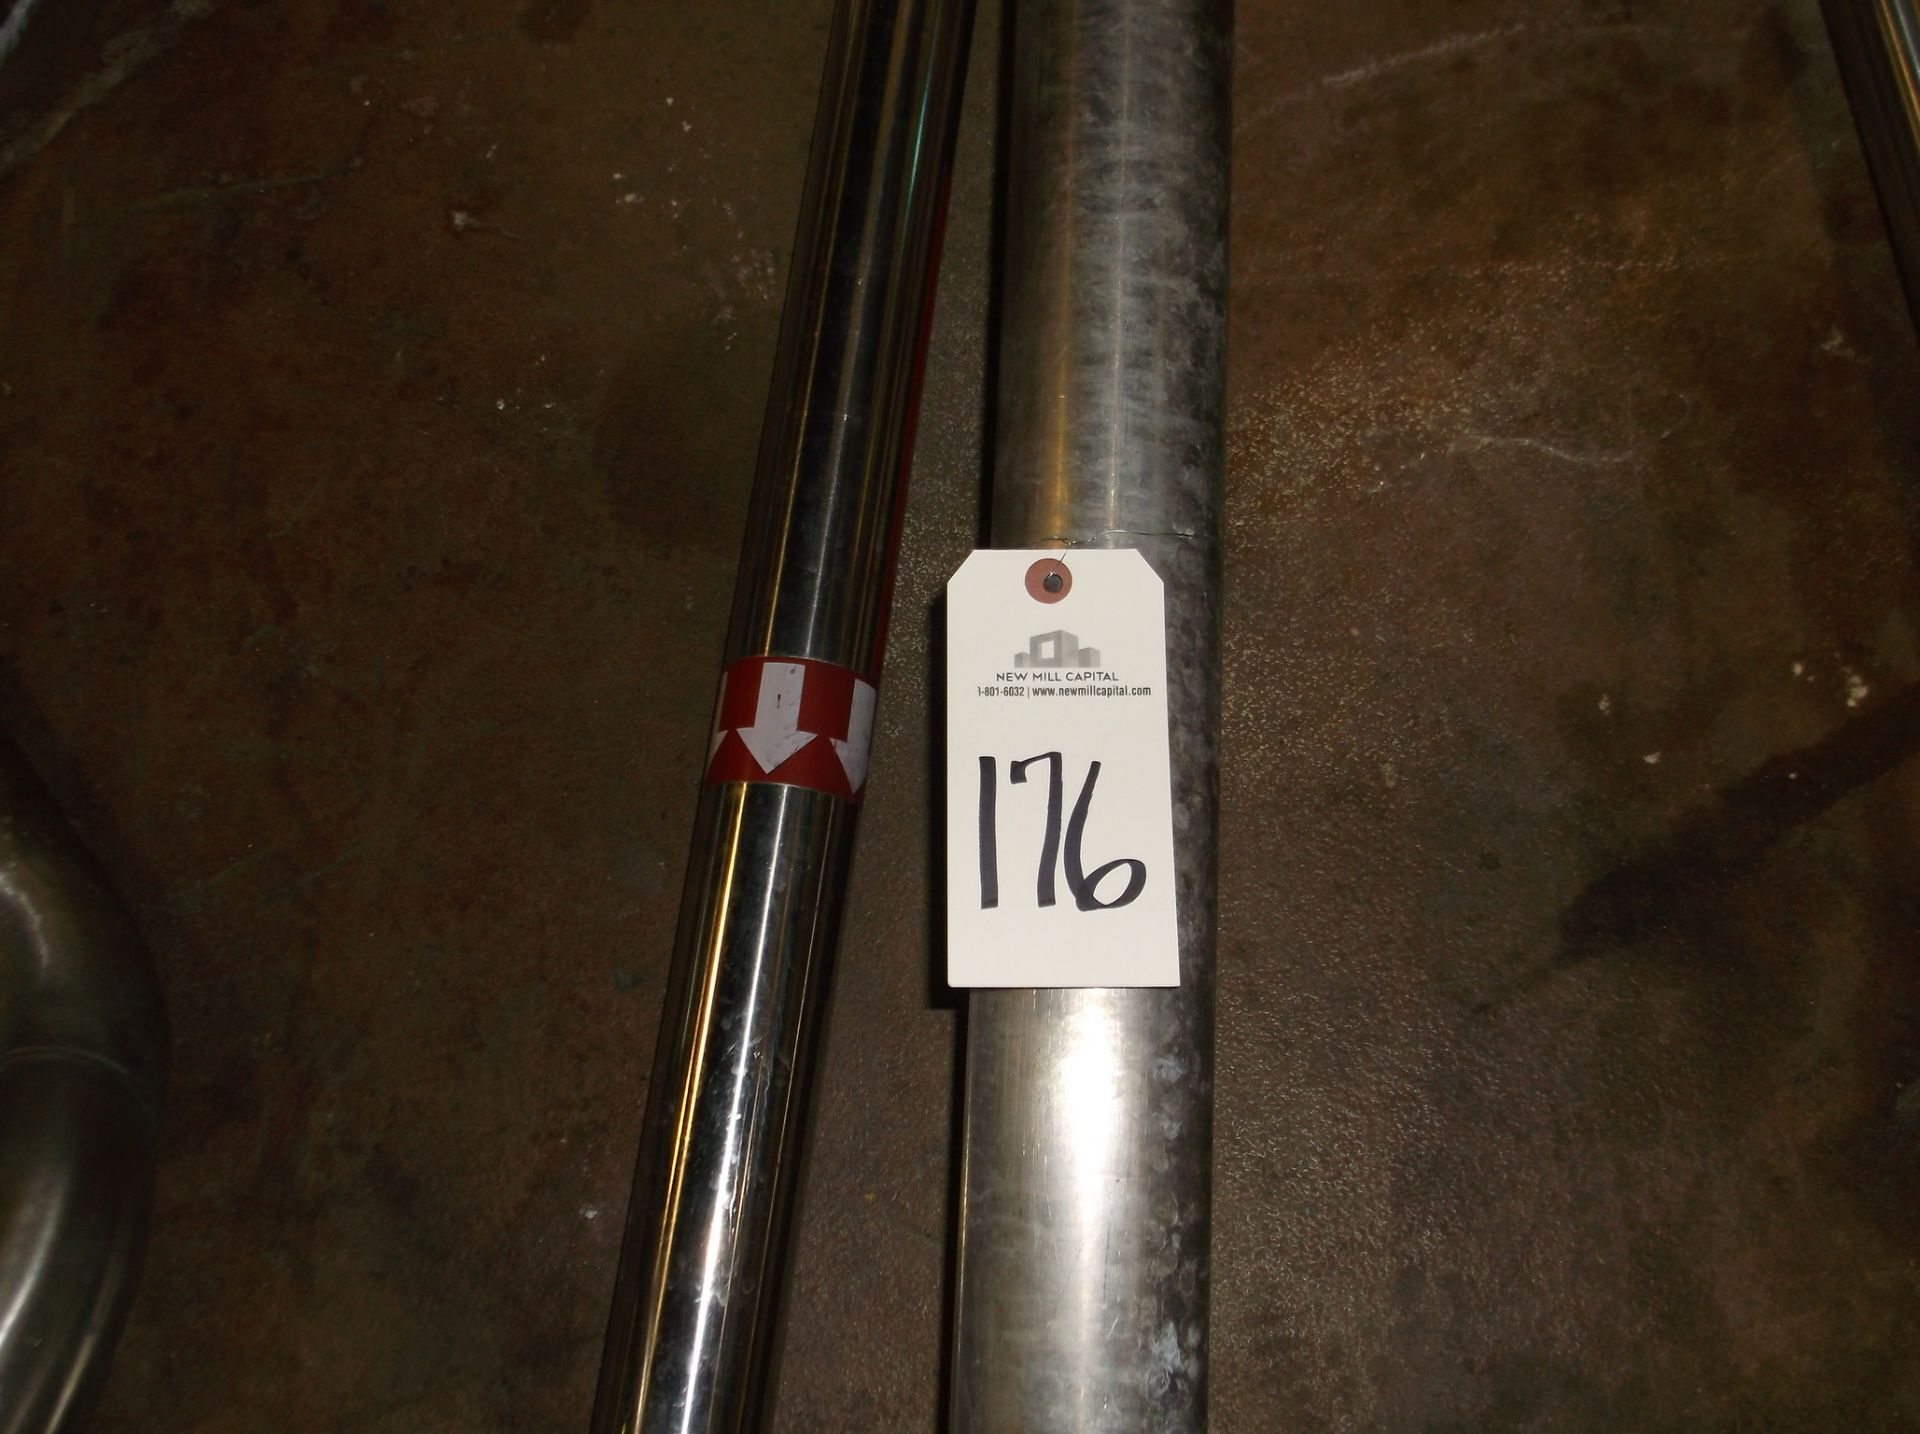 Approximately 100ft SS tubing 1.5in - 3in | Rigging/Loading Fee: $50 - Image 2 of 2